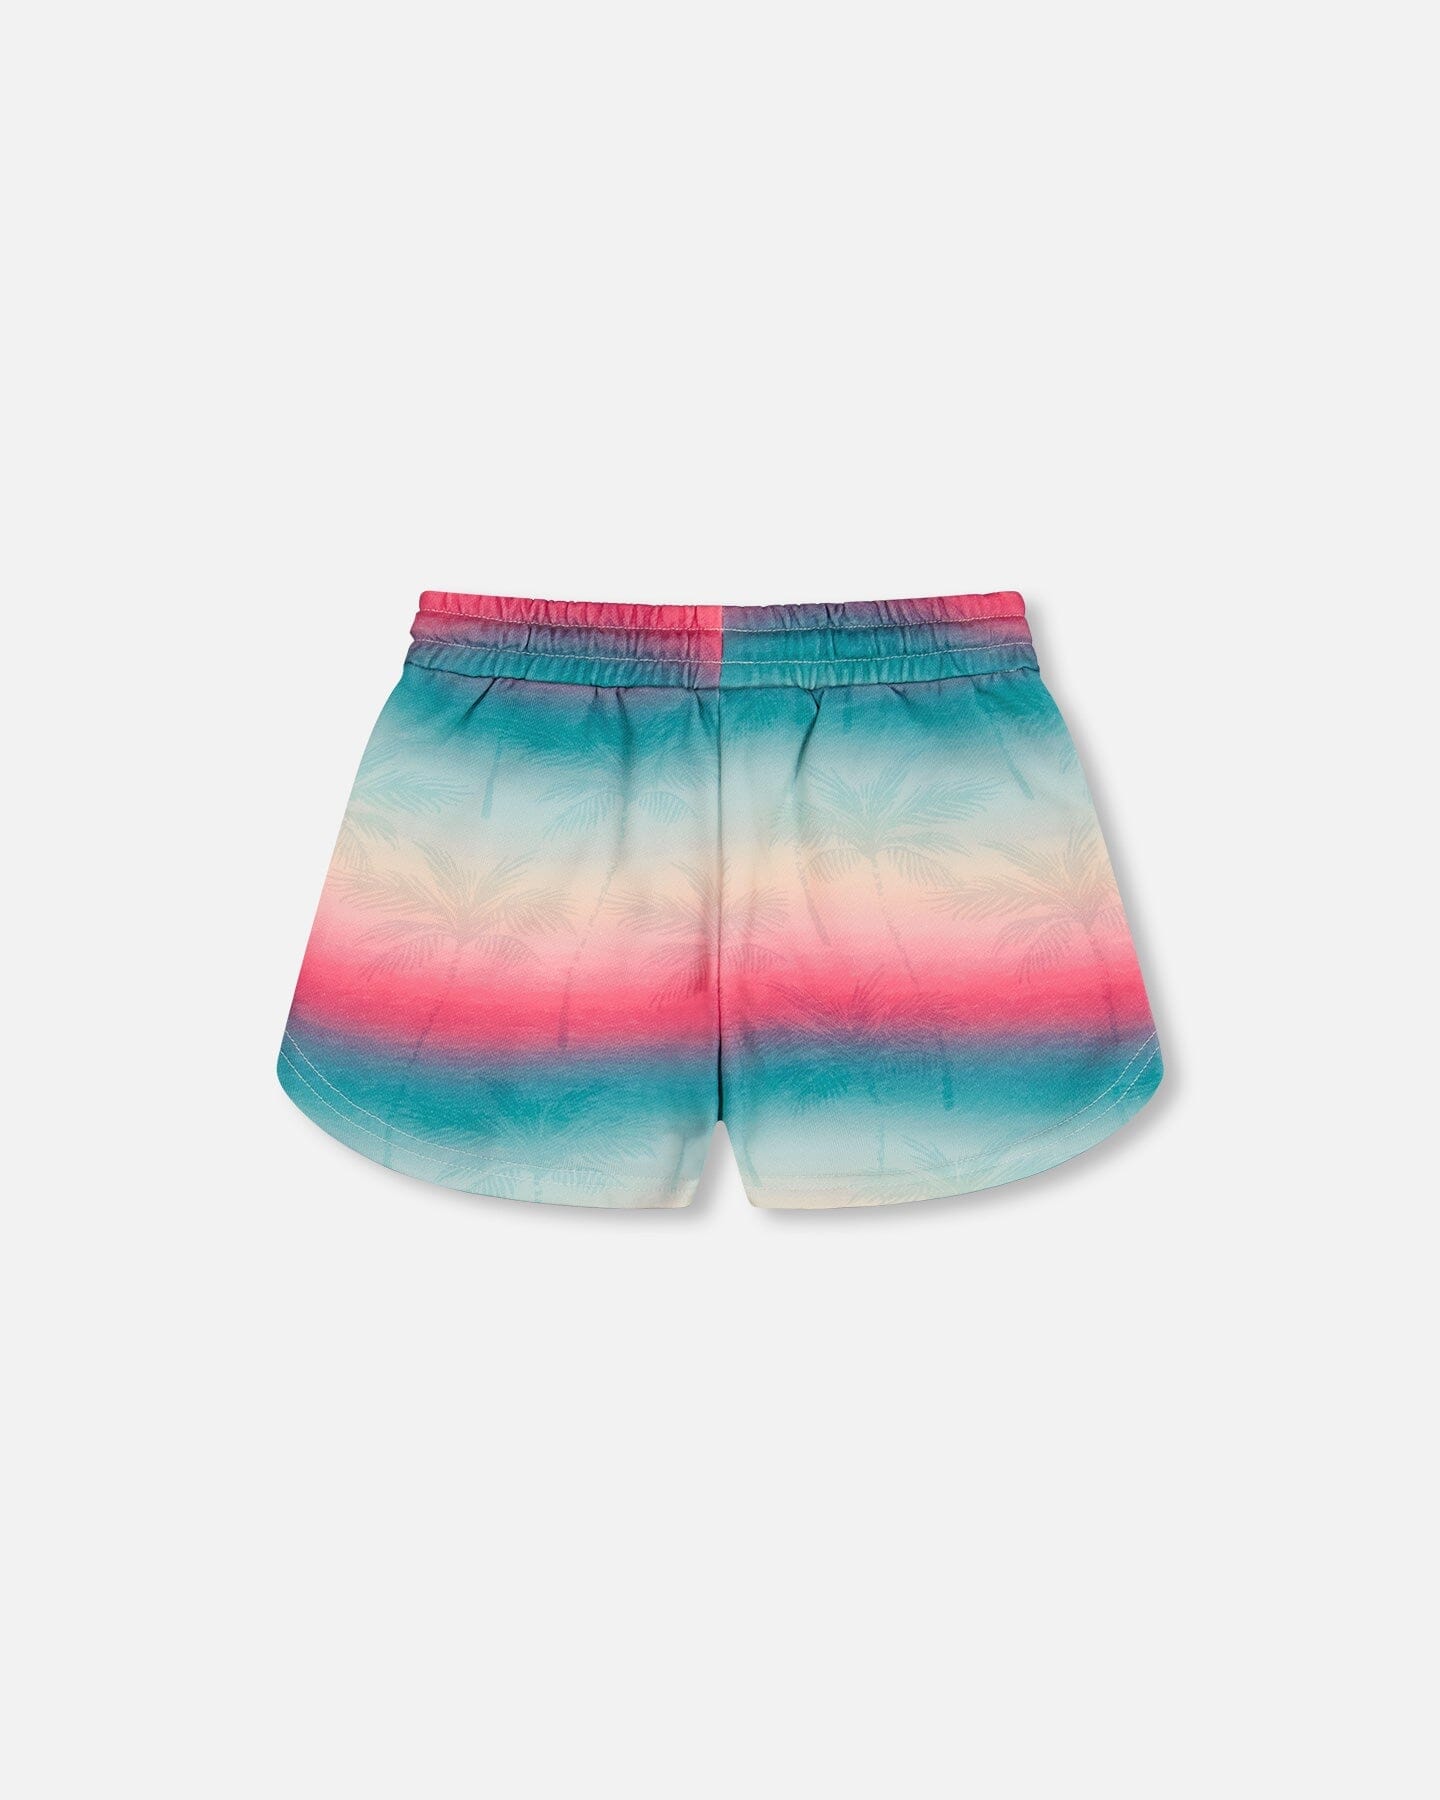 French Terry Short Printed Tie Dye Waves - F30J27_095